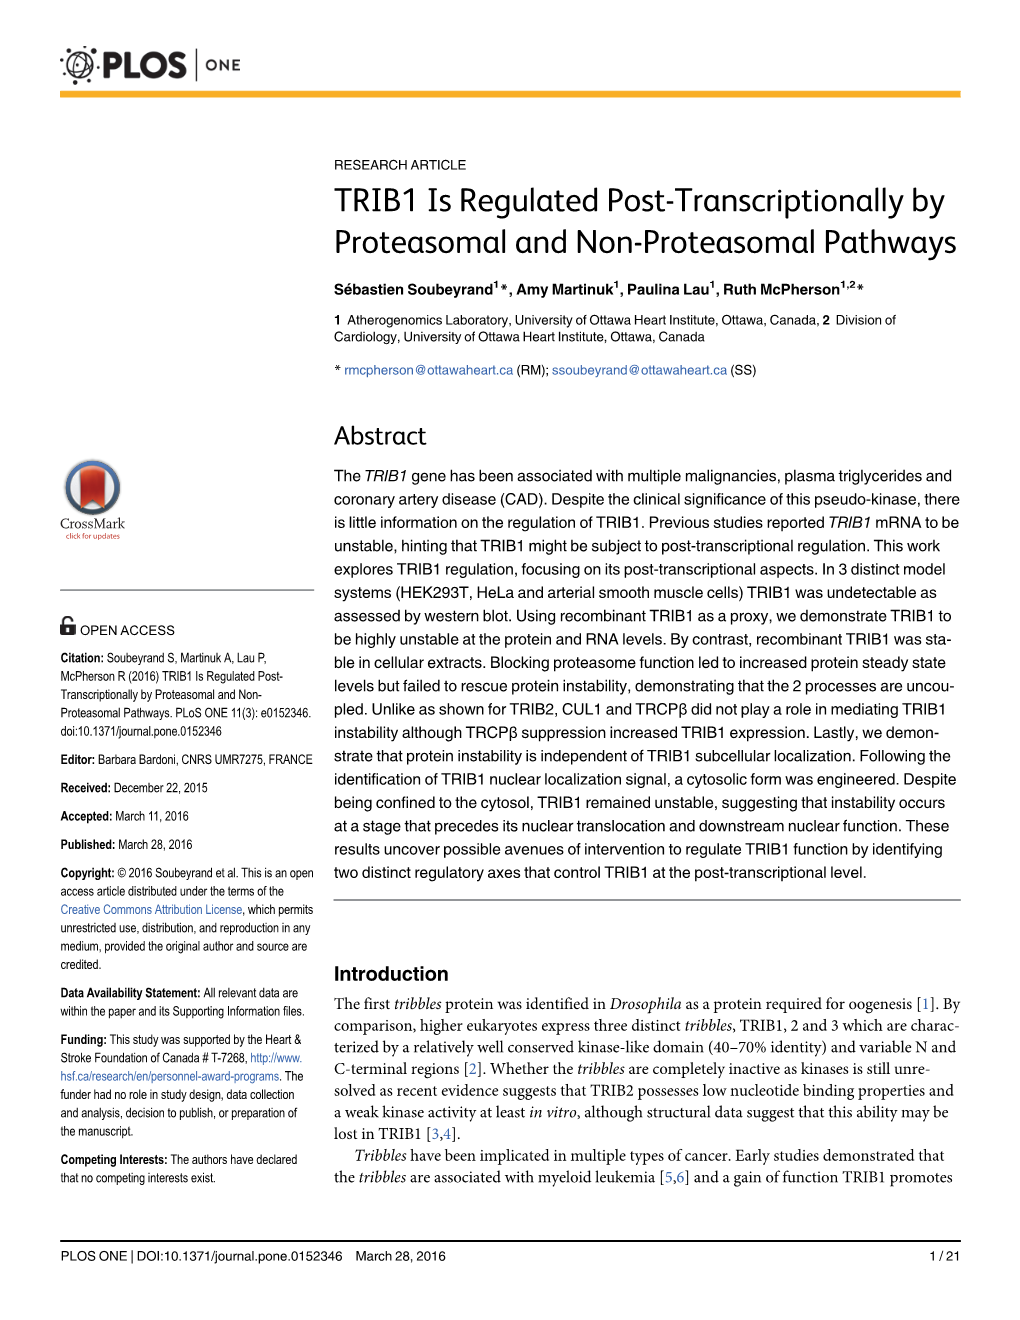 TRIB1 Is Regulated Post-Transcriptionally by Proteasomal and Non-Proteasomal Pathways